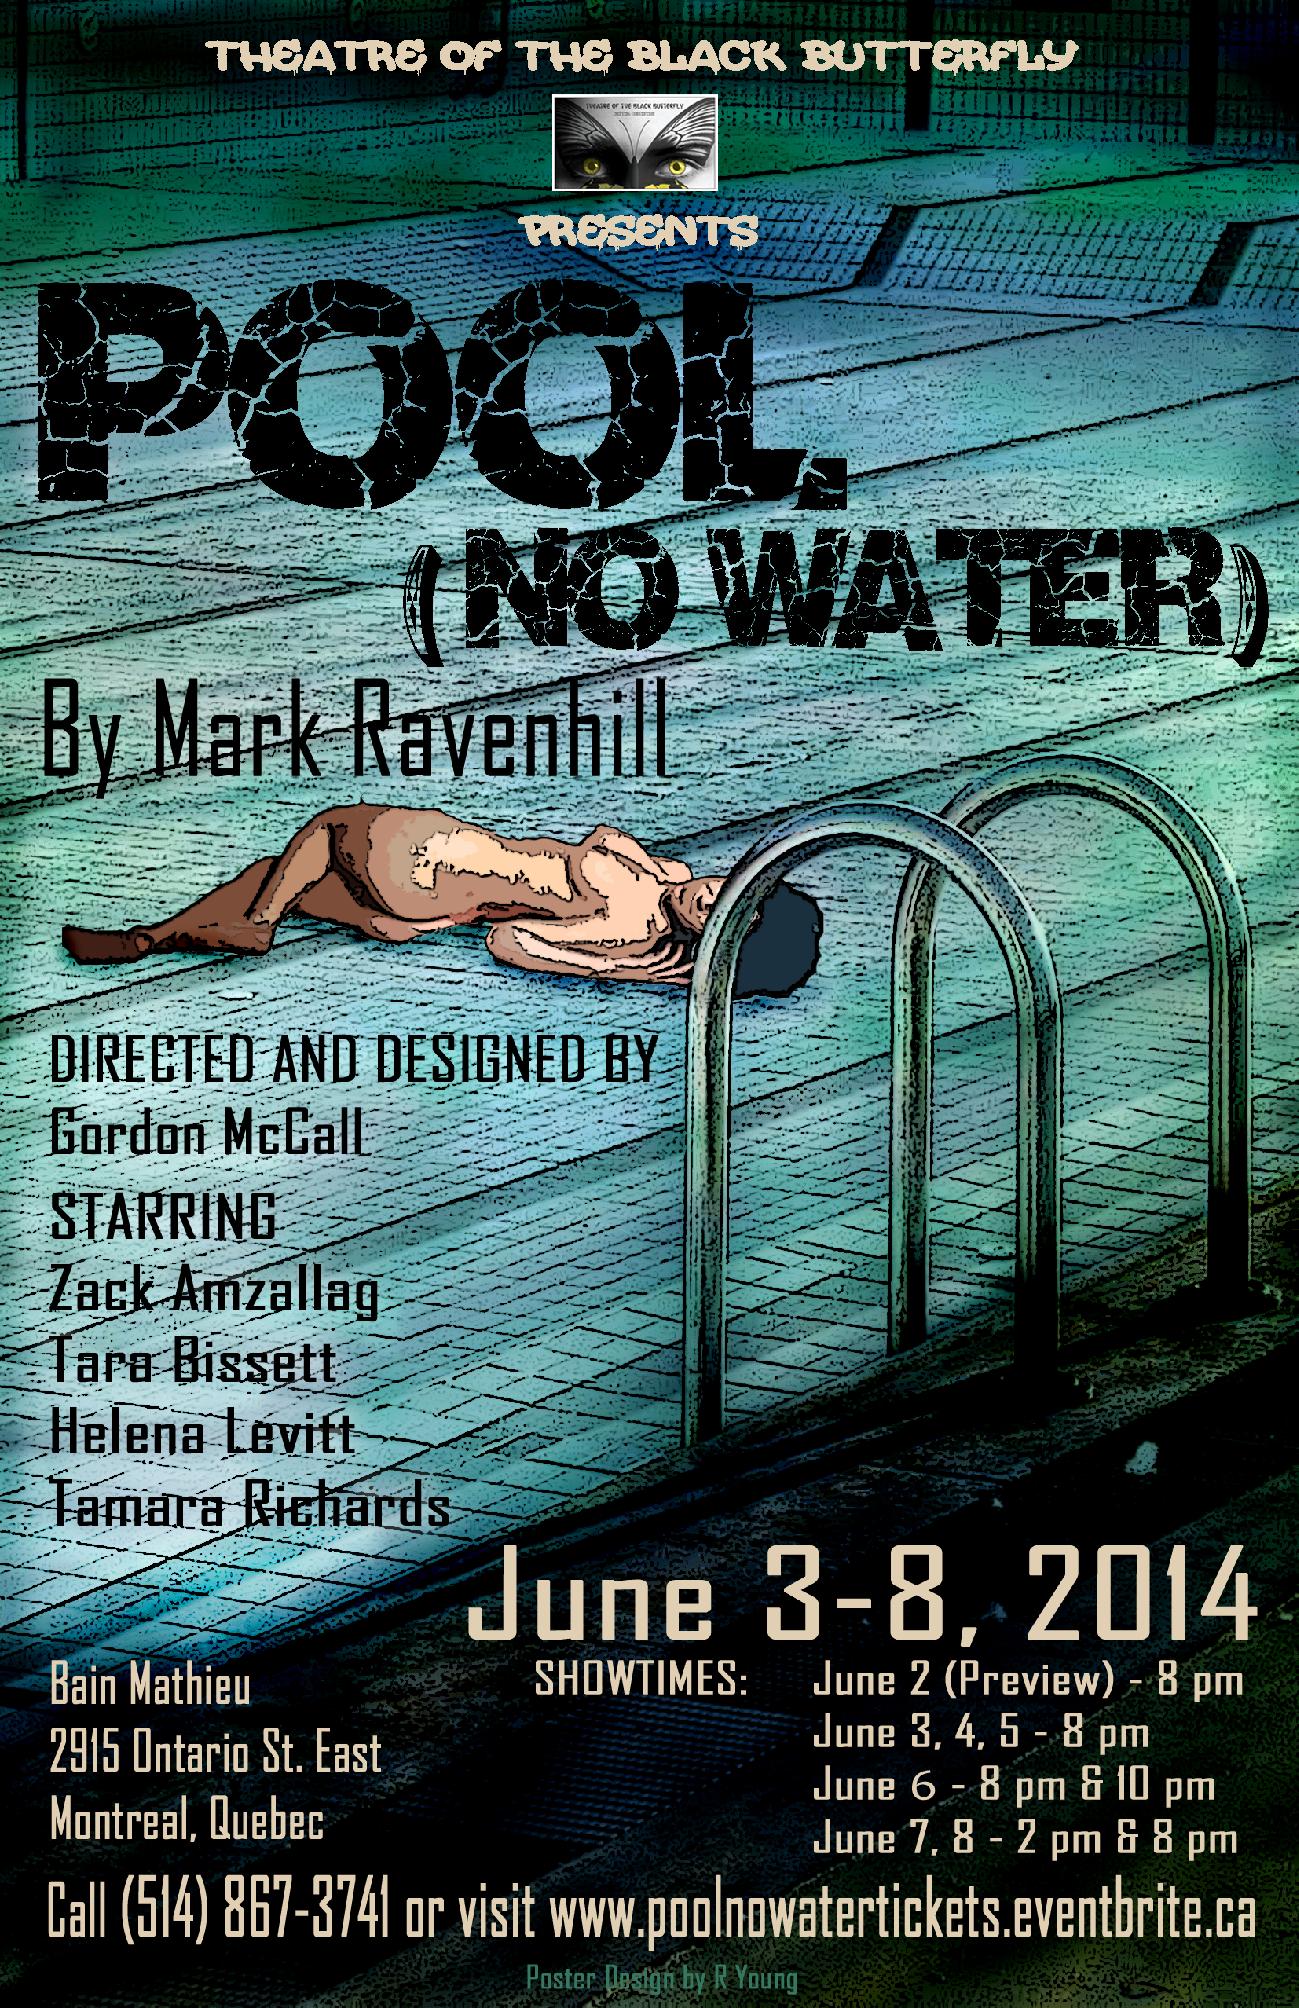 Pool (No Water) - Theatre of the Black Butterfly (AD Gordon McCall) Montreal, 2014